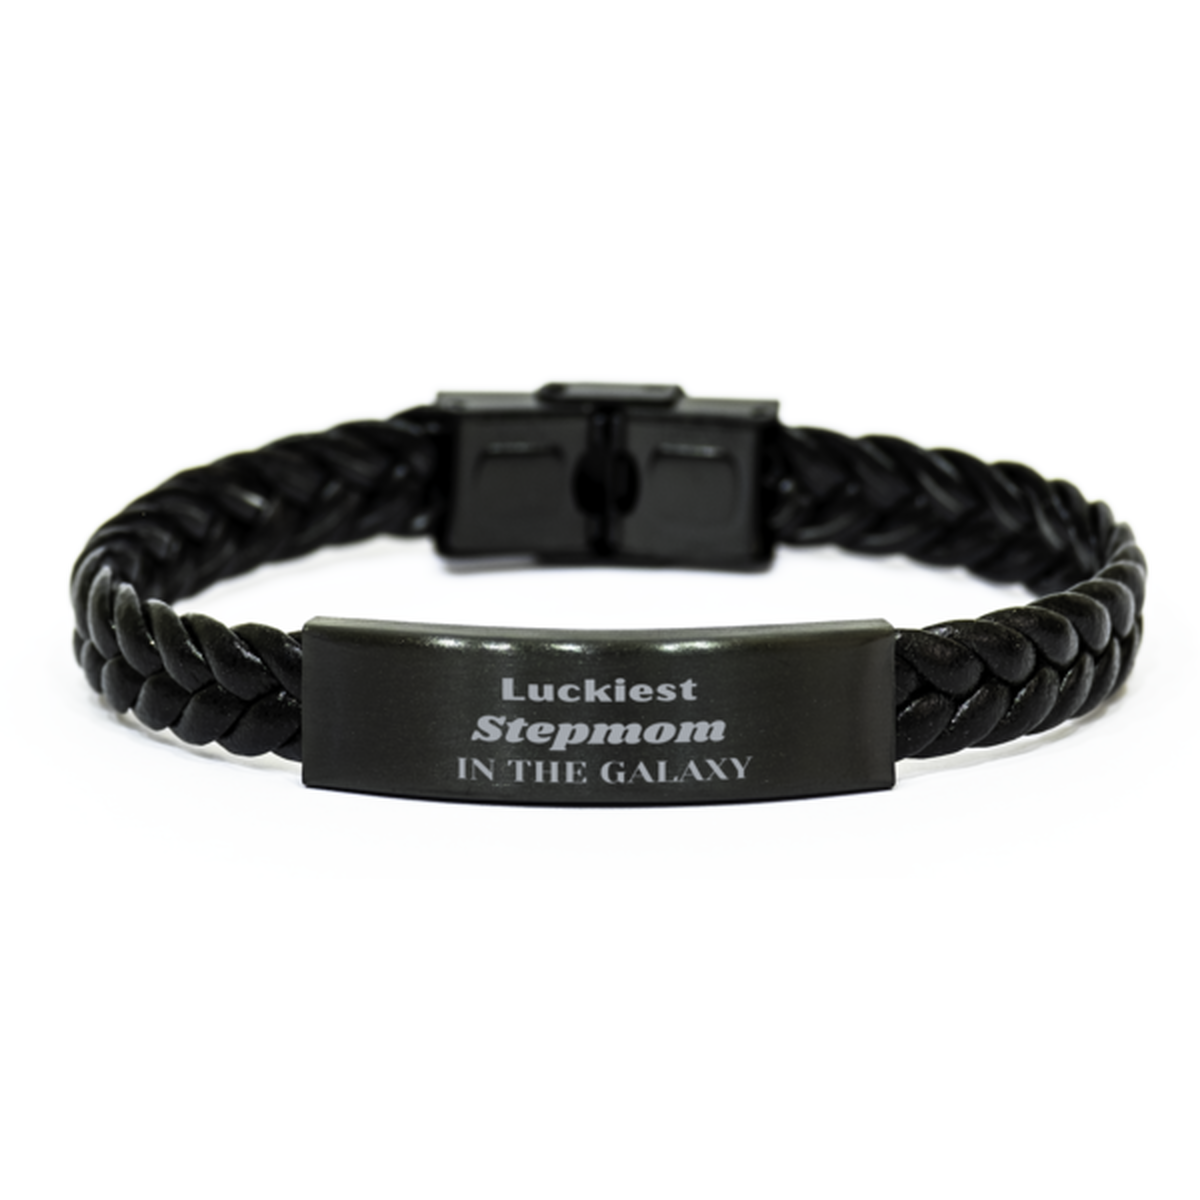 Luckiest Stepmom in the Galaxy, To My Stepmom Engraved Gifts, Christmas Stepmom Braided Leather Bracelet Gifts, X-mas Birthday Unique Gifts For Stepmom Men Women